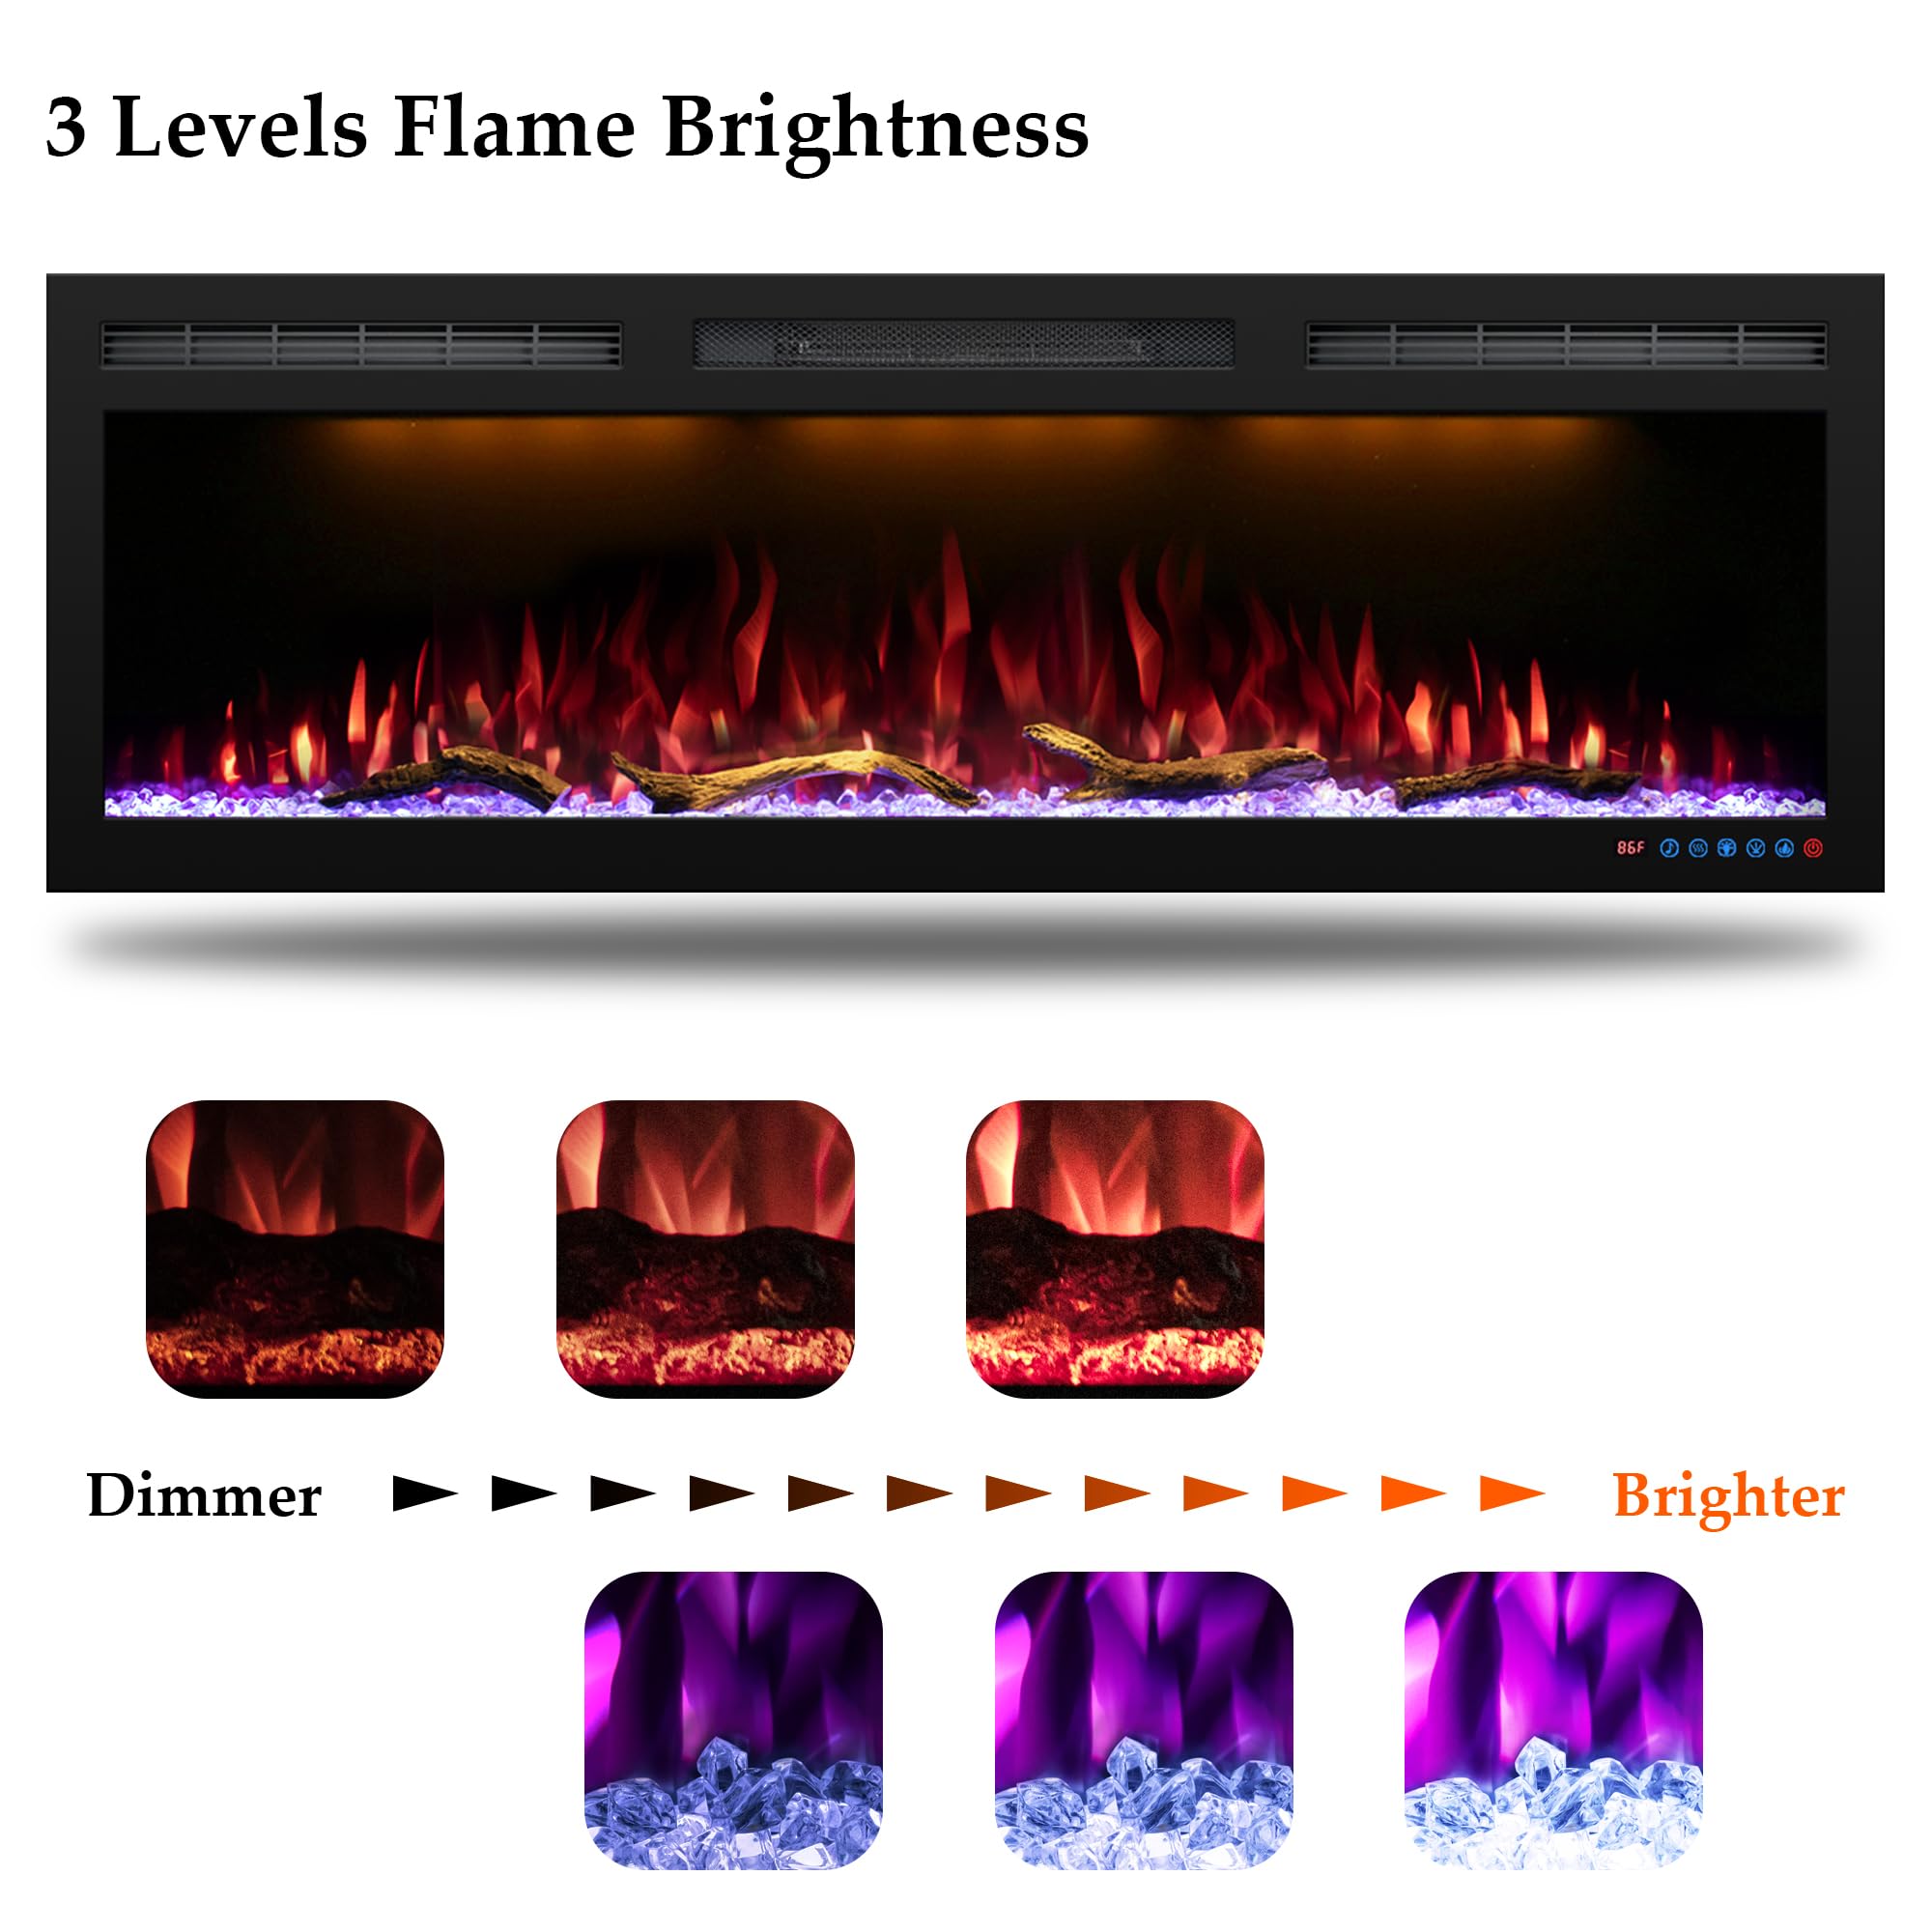 Dreamflame 60" WiFi-Enabled Electric Fireplace, Smart Control via Alexa or App, Recessed & Wall Mounted Fireplace Heater with Thermostat, Slim Frame, Multi-Color Combinations, Black